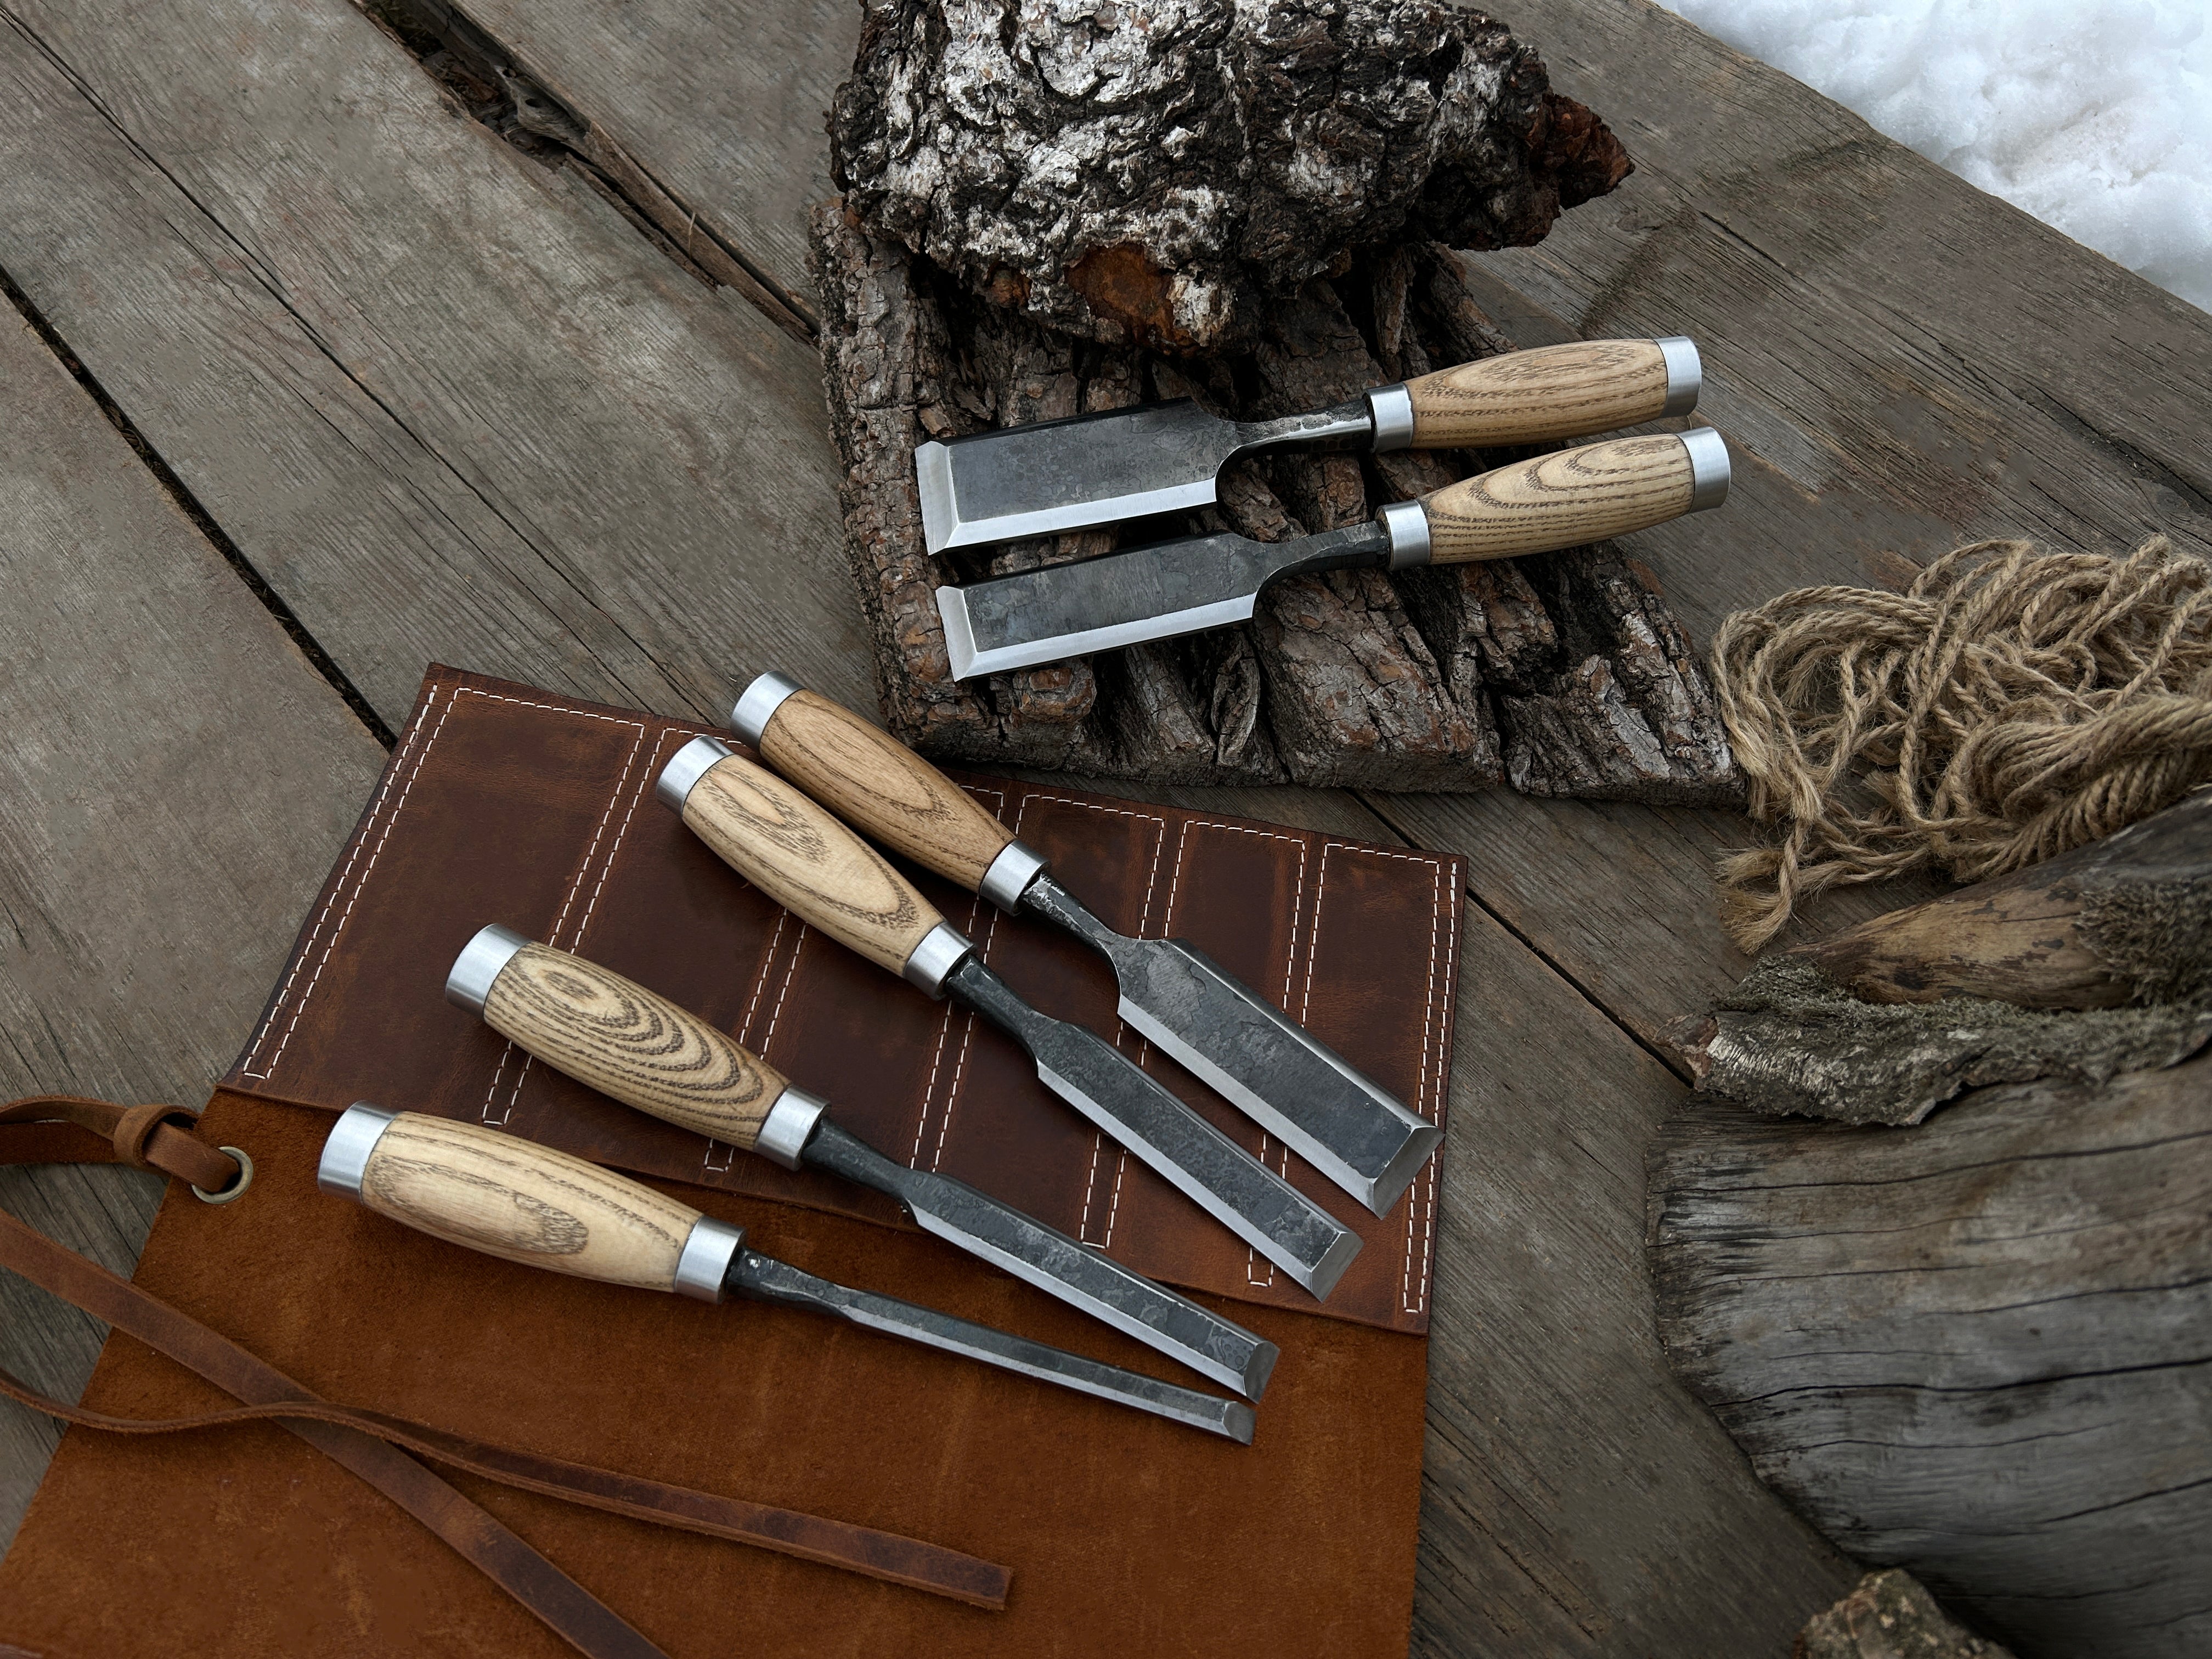 6-Piece Hand-Forged Wood Carving Chisels Set